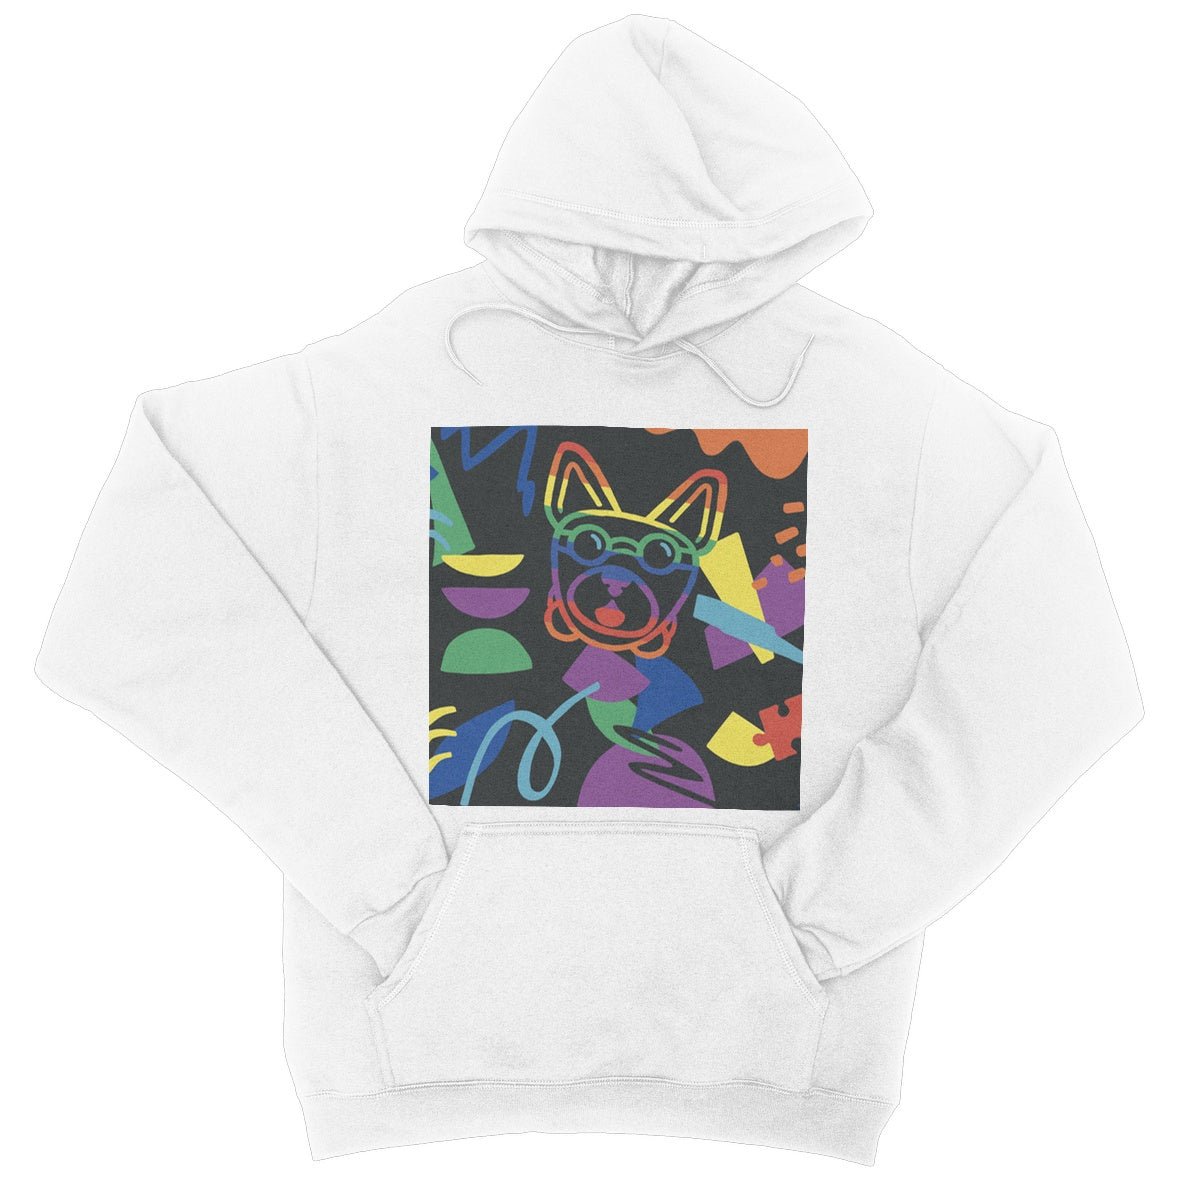 College Hoodie - Puzzle Bored